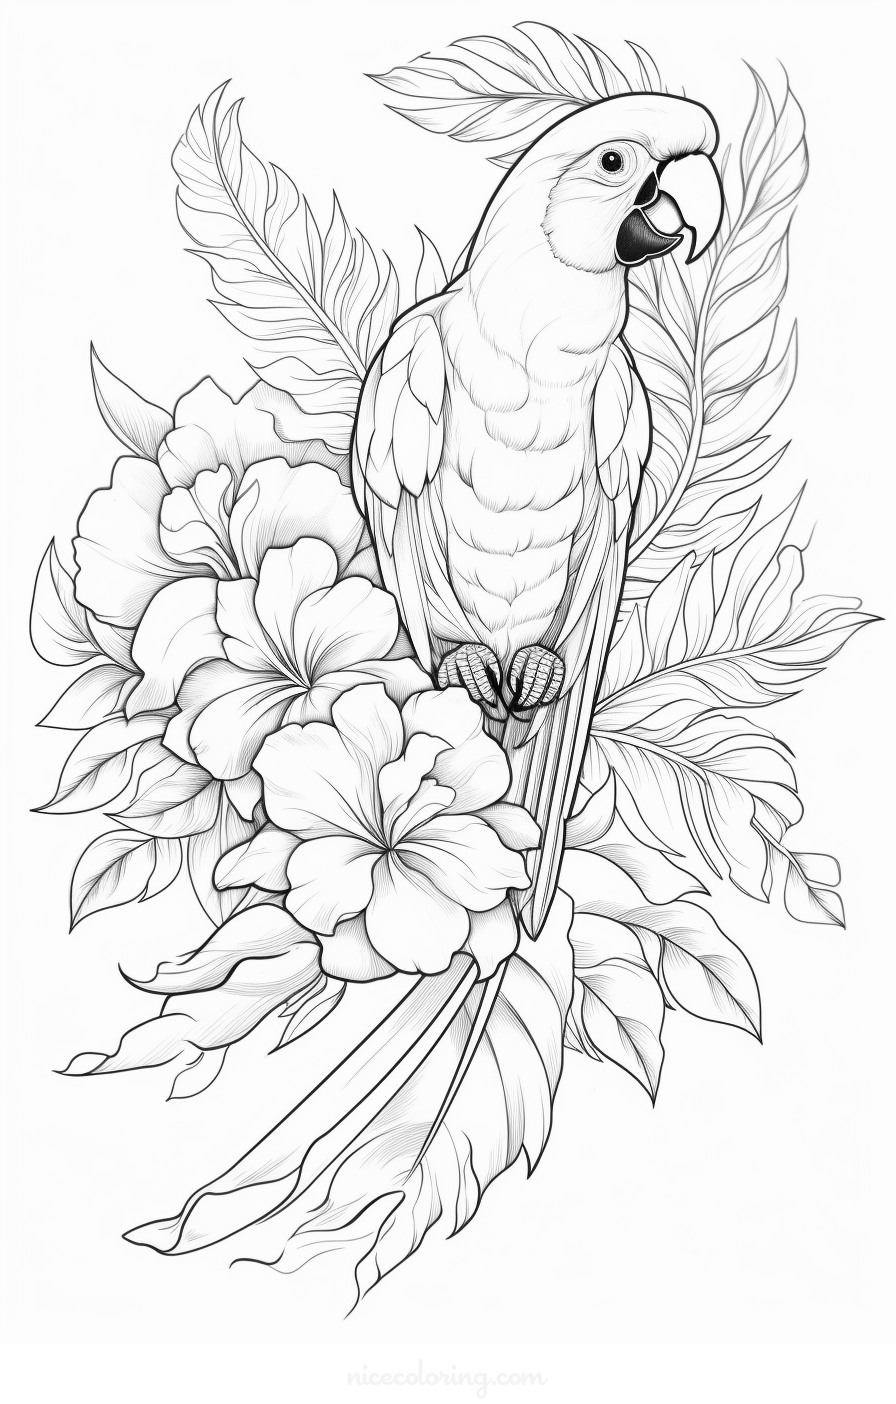 Birds on a branch coloring page